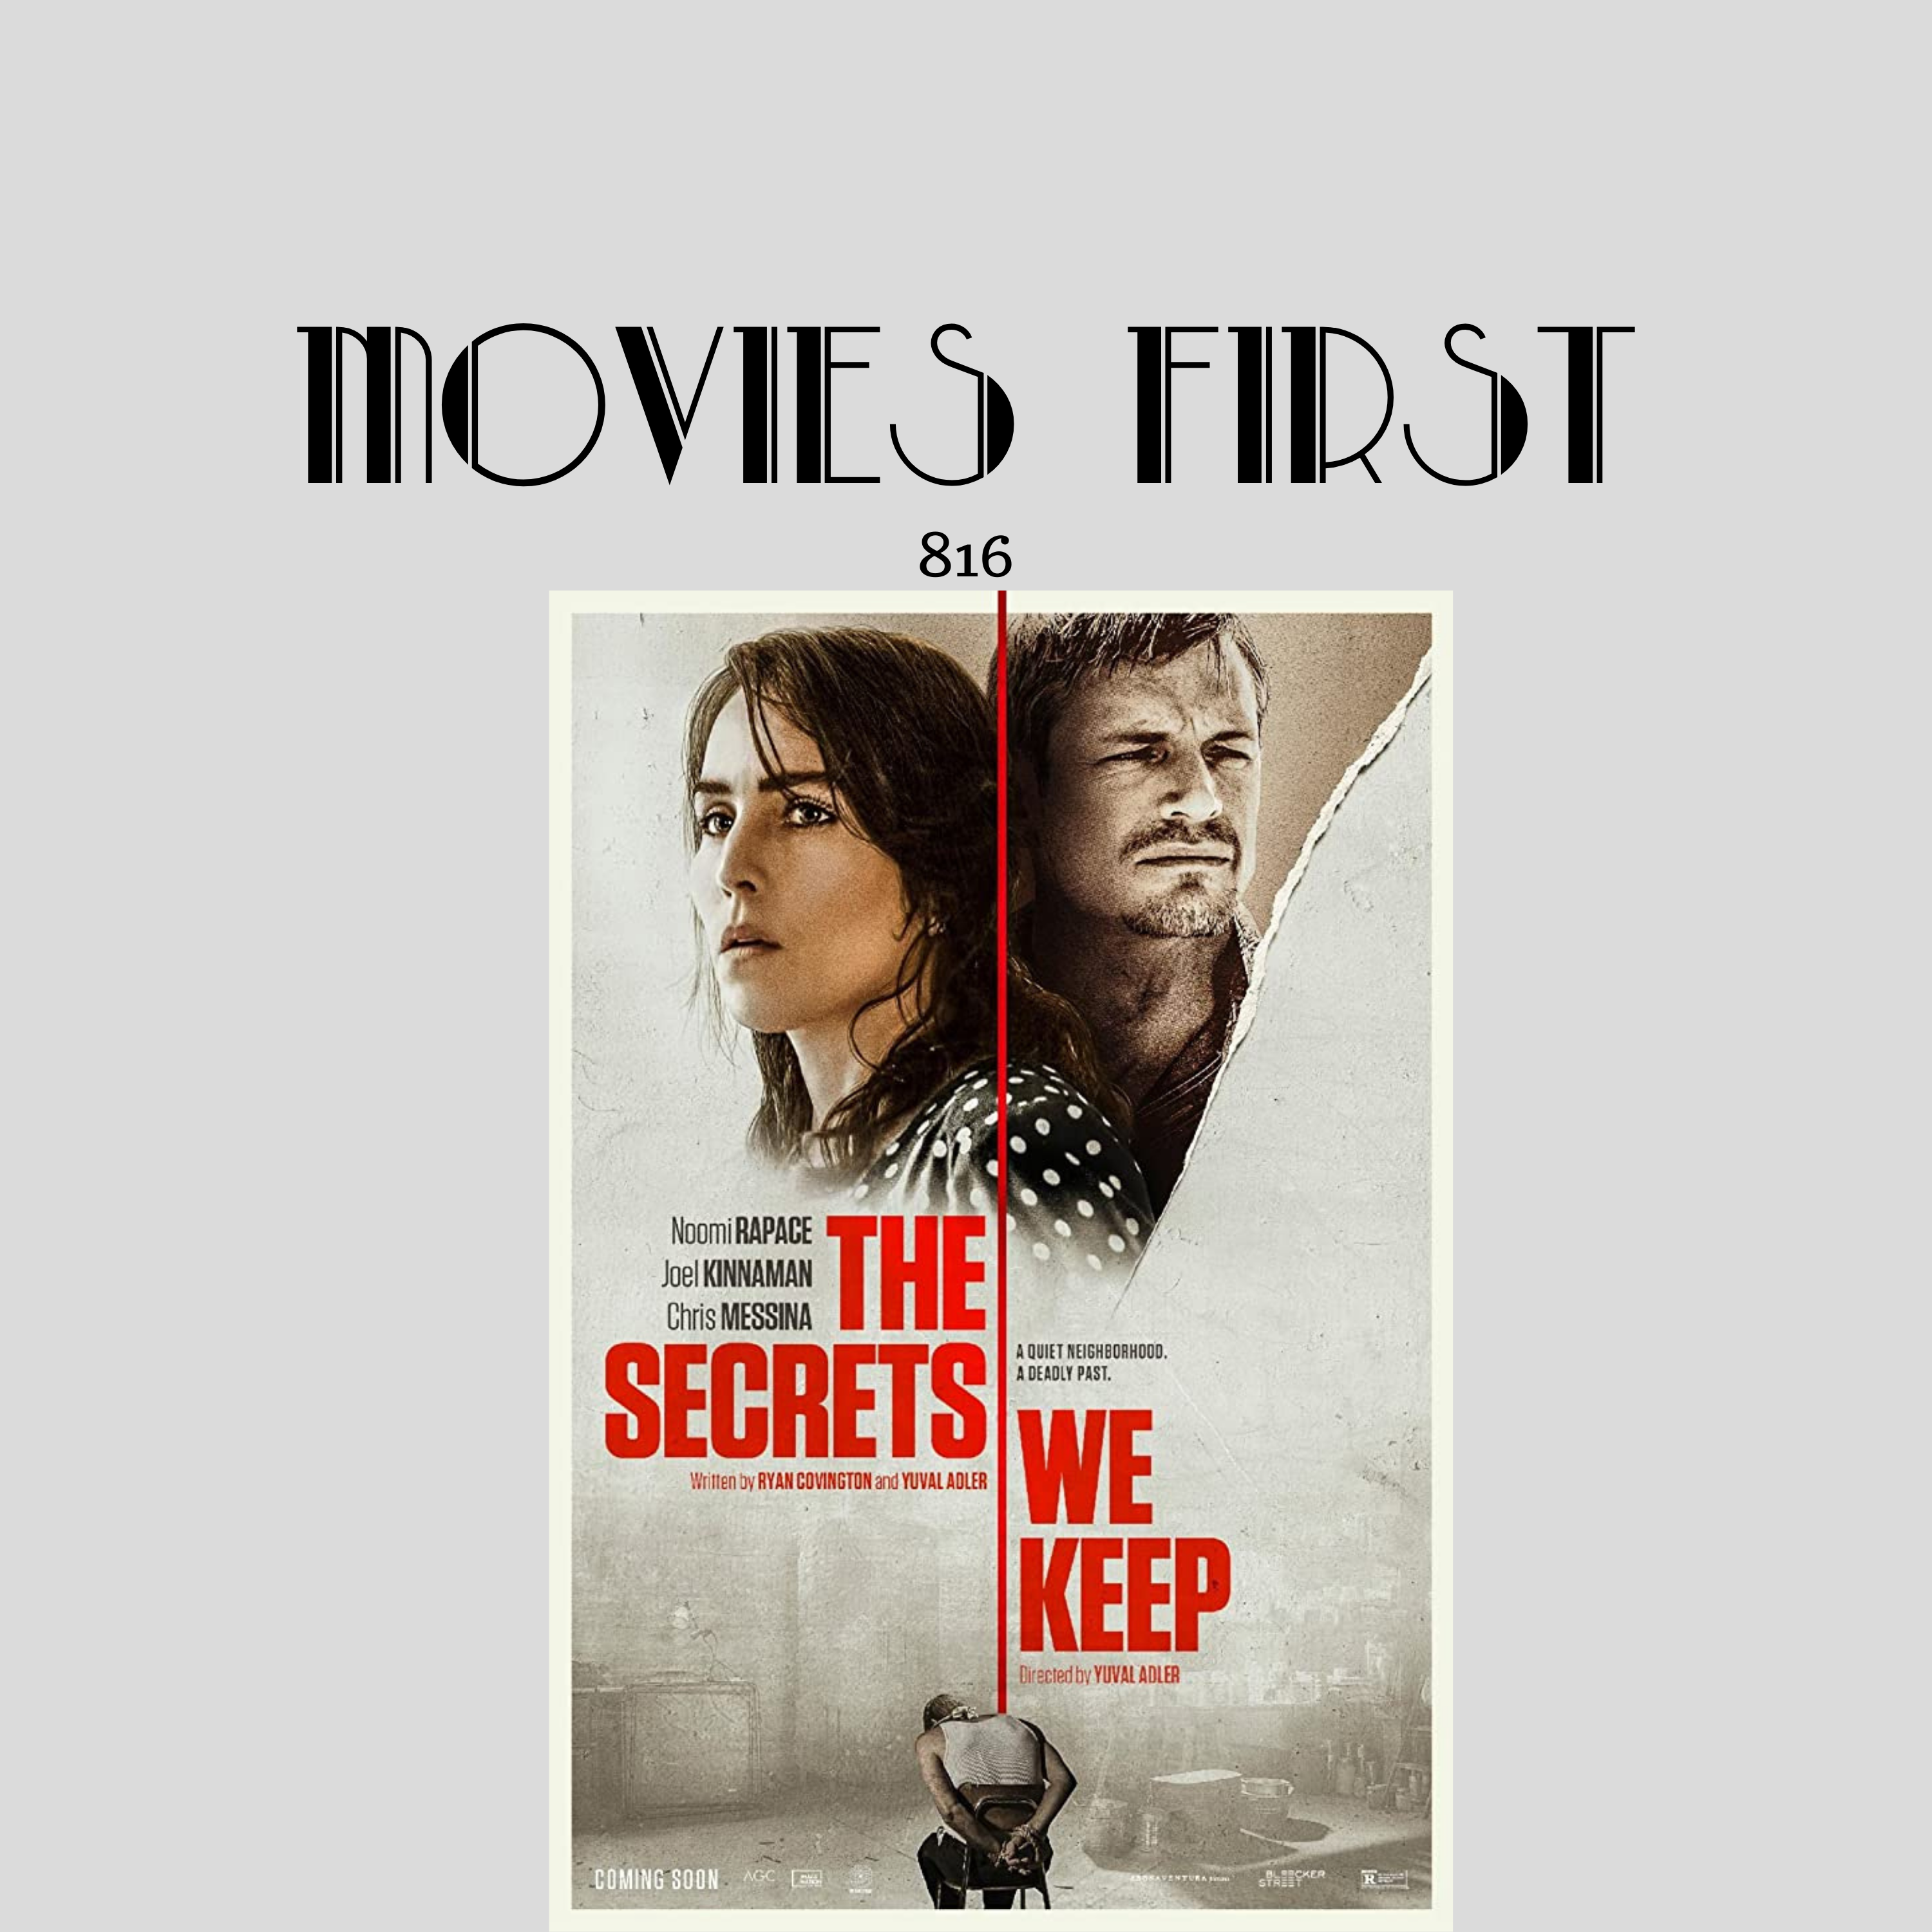 The Secrets We Keep (Drama, Thriller) (the @MoviesFirst review)